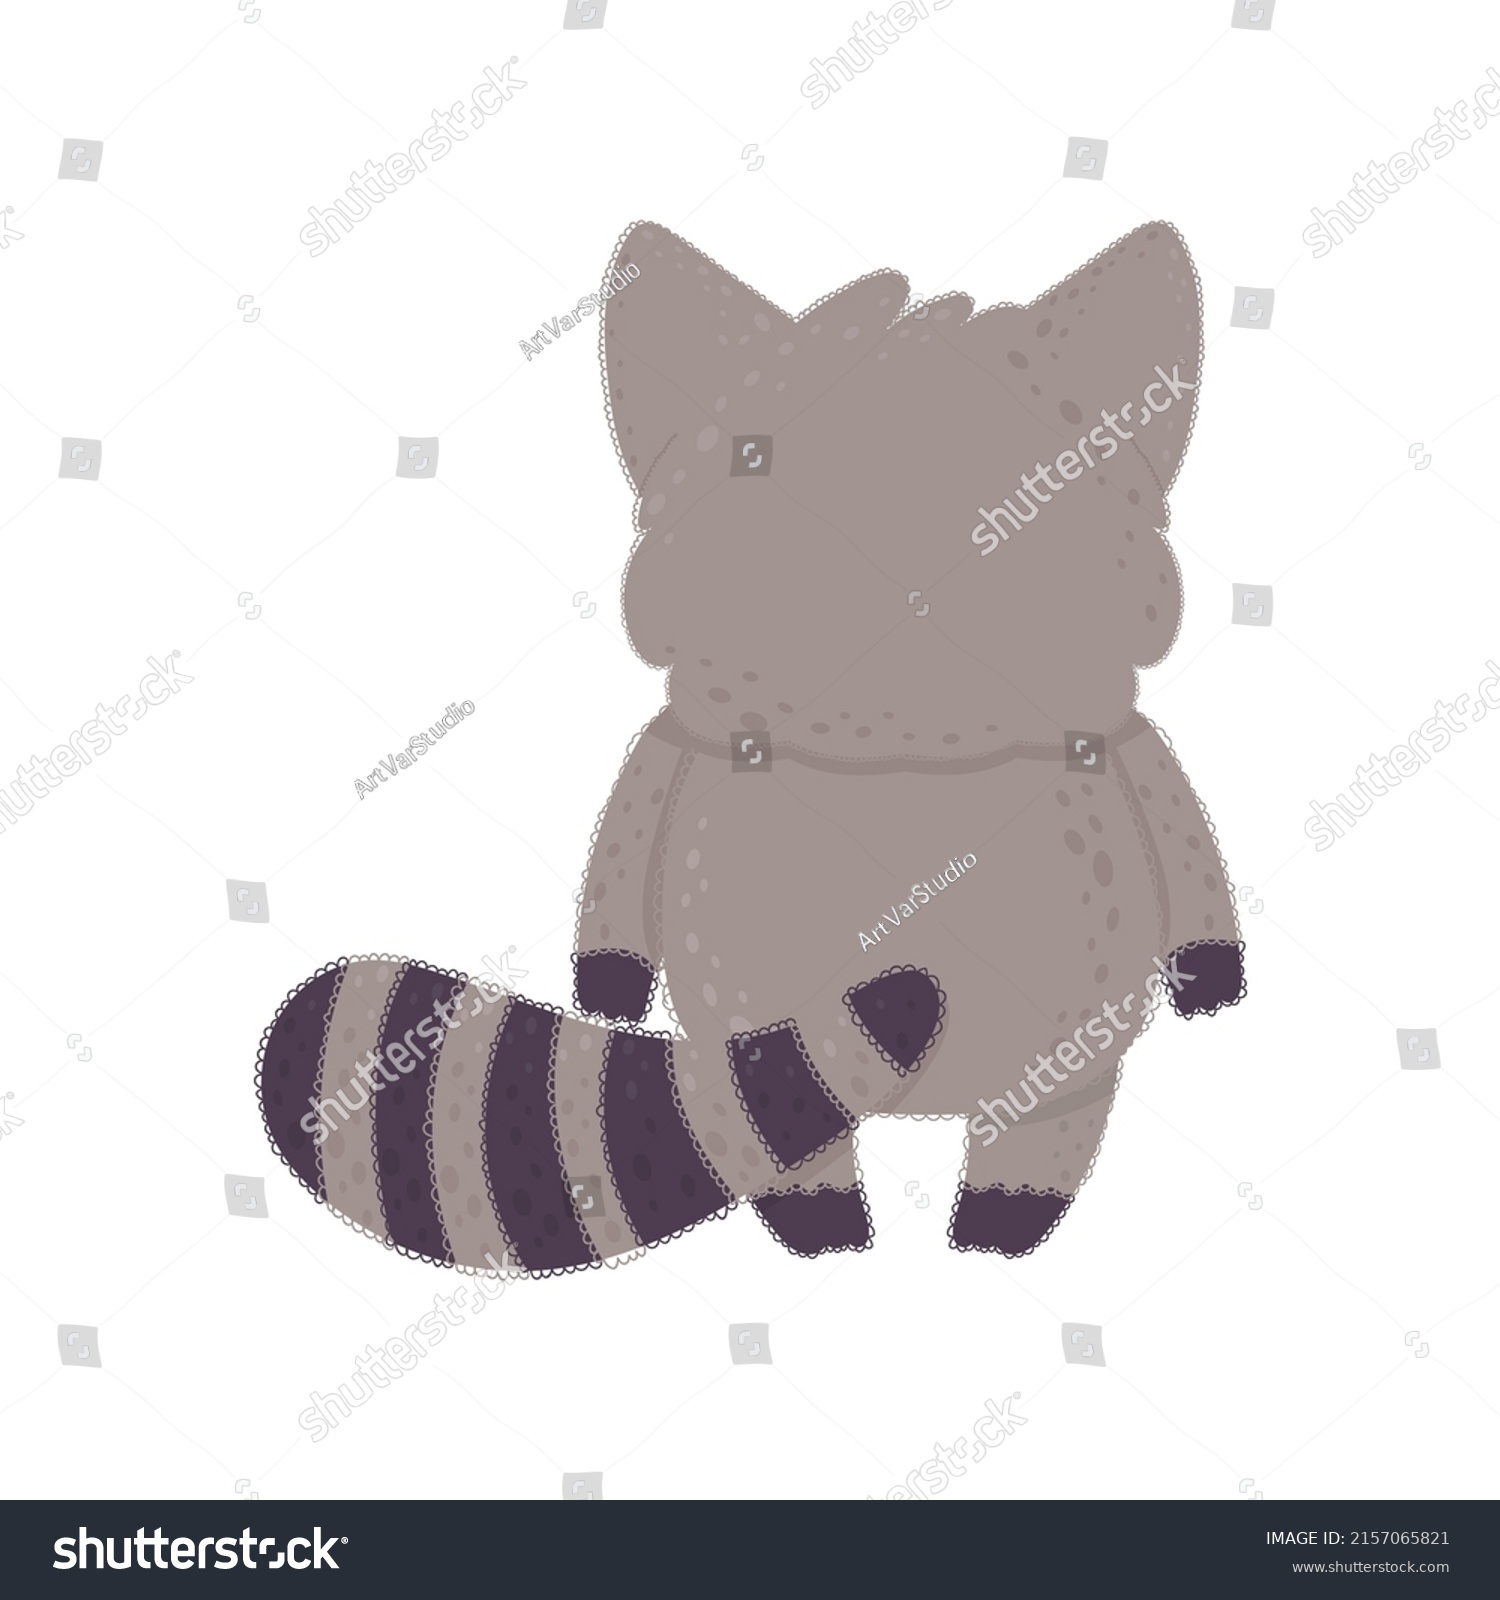 SVG of Drawn baby domesticated raccoon. Vector illustration of a cute animal. Cute little illustration of racoon for kids, baby book, fairy tales, covers, baby shower invitation, textile t-shirt. svg